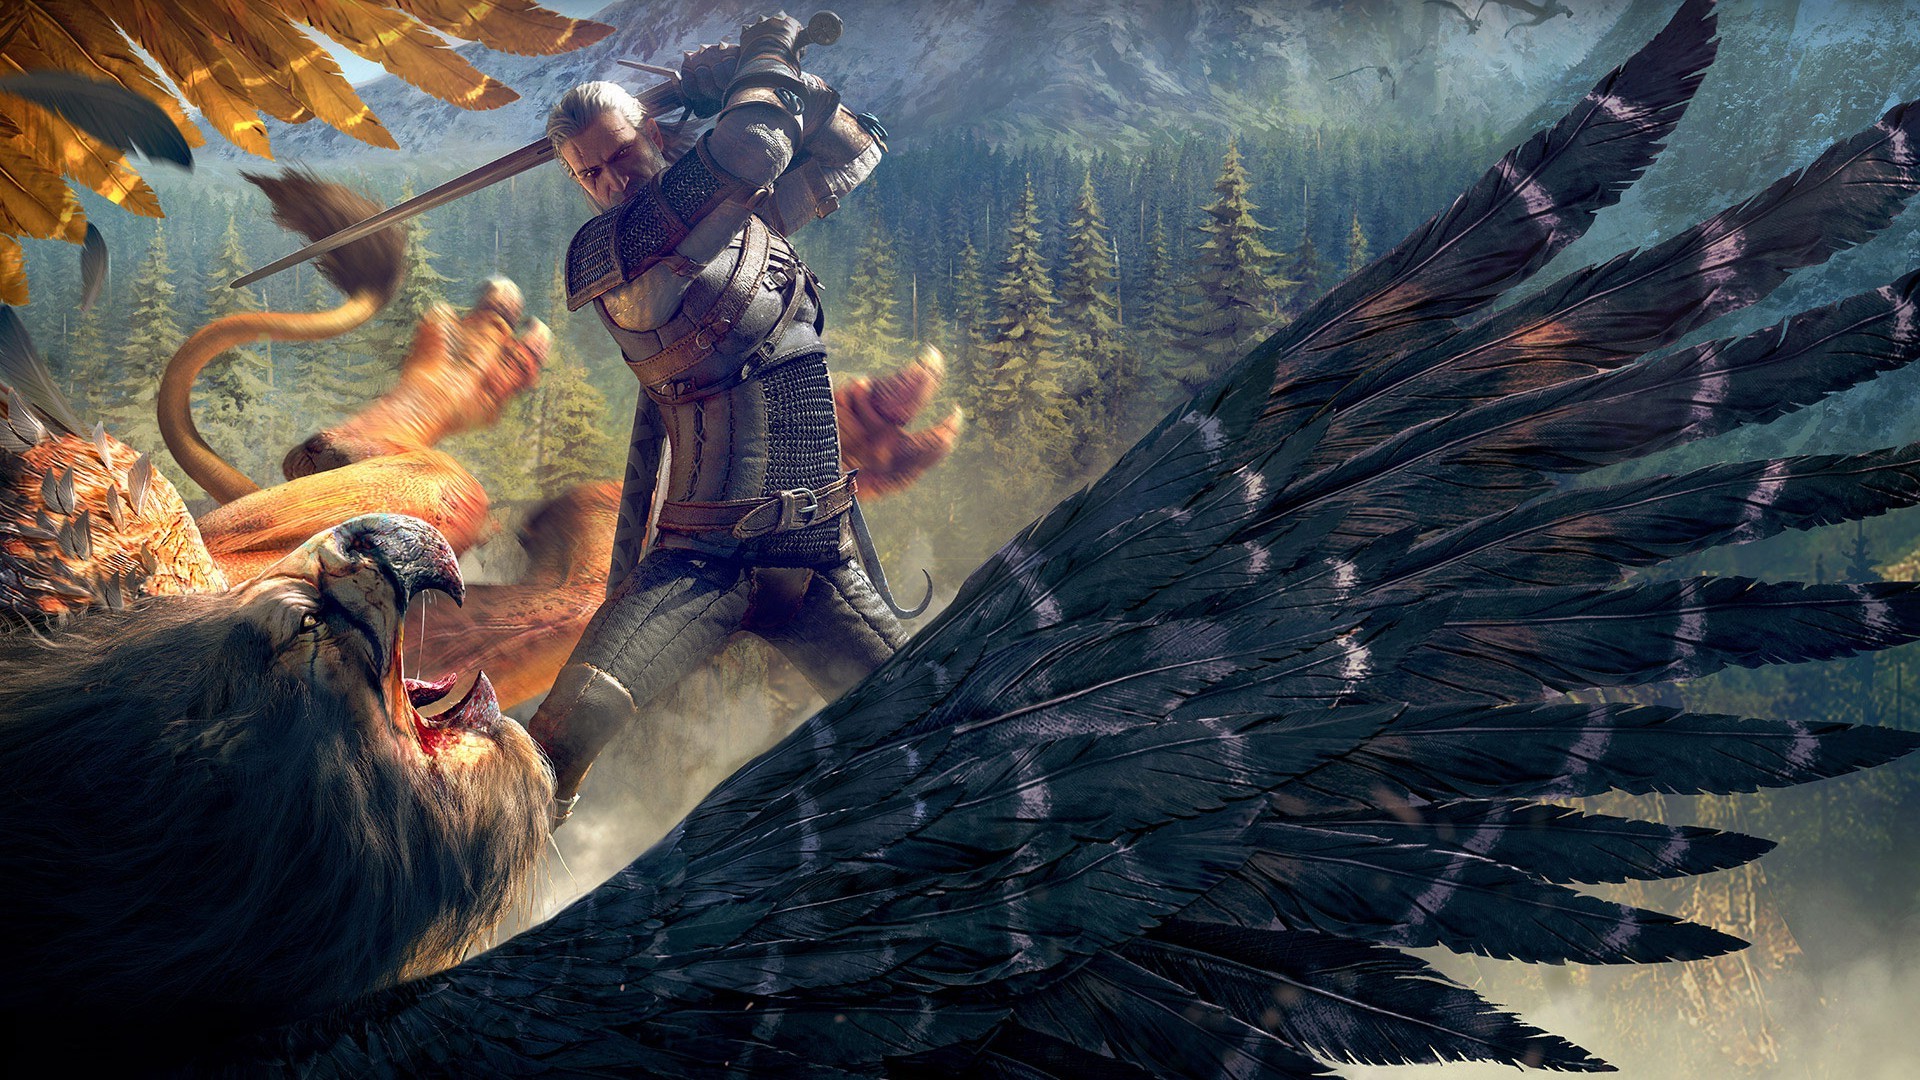 video Games, The Witcher 3: Wild Hunt Wallpaper